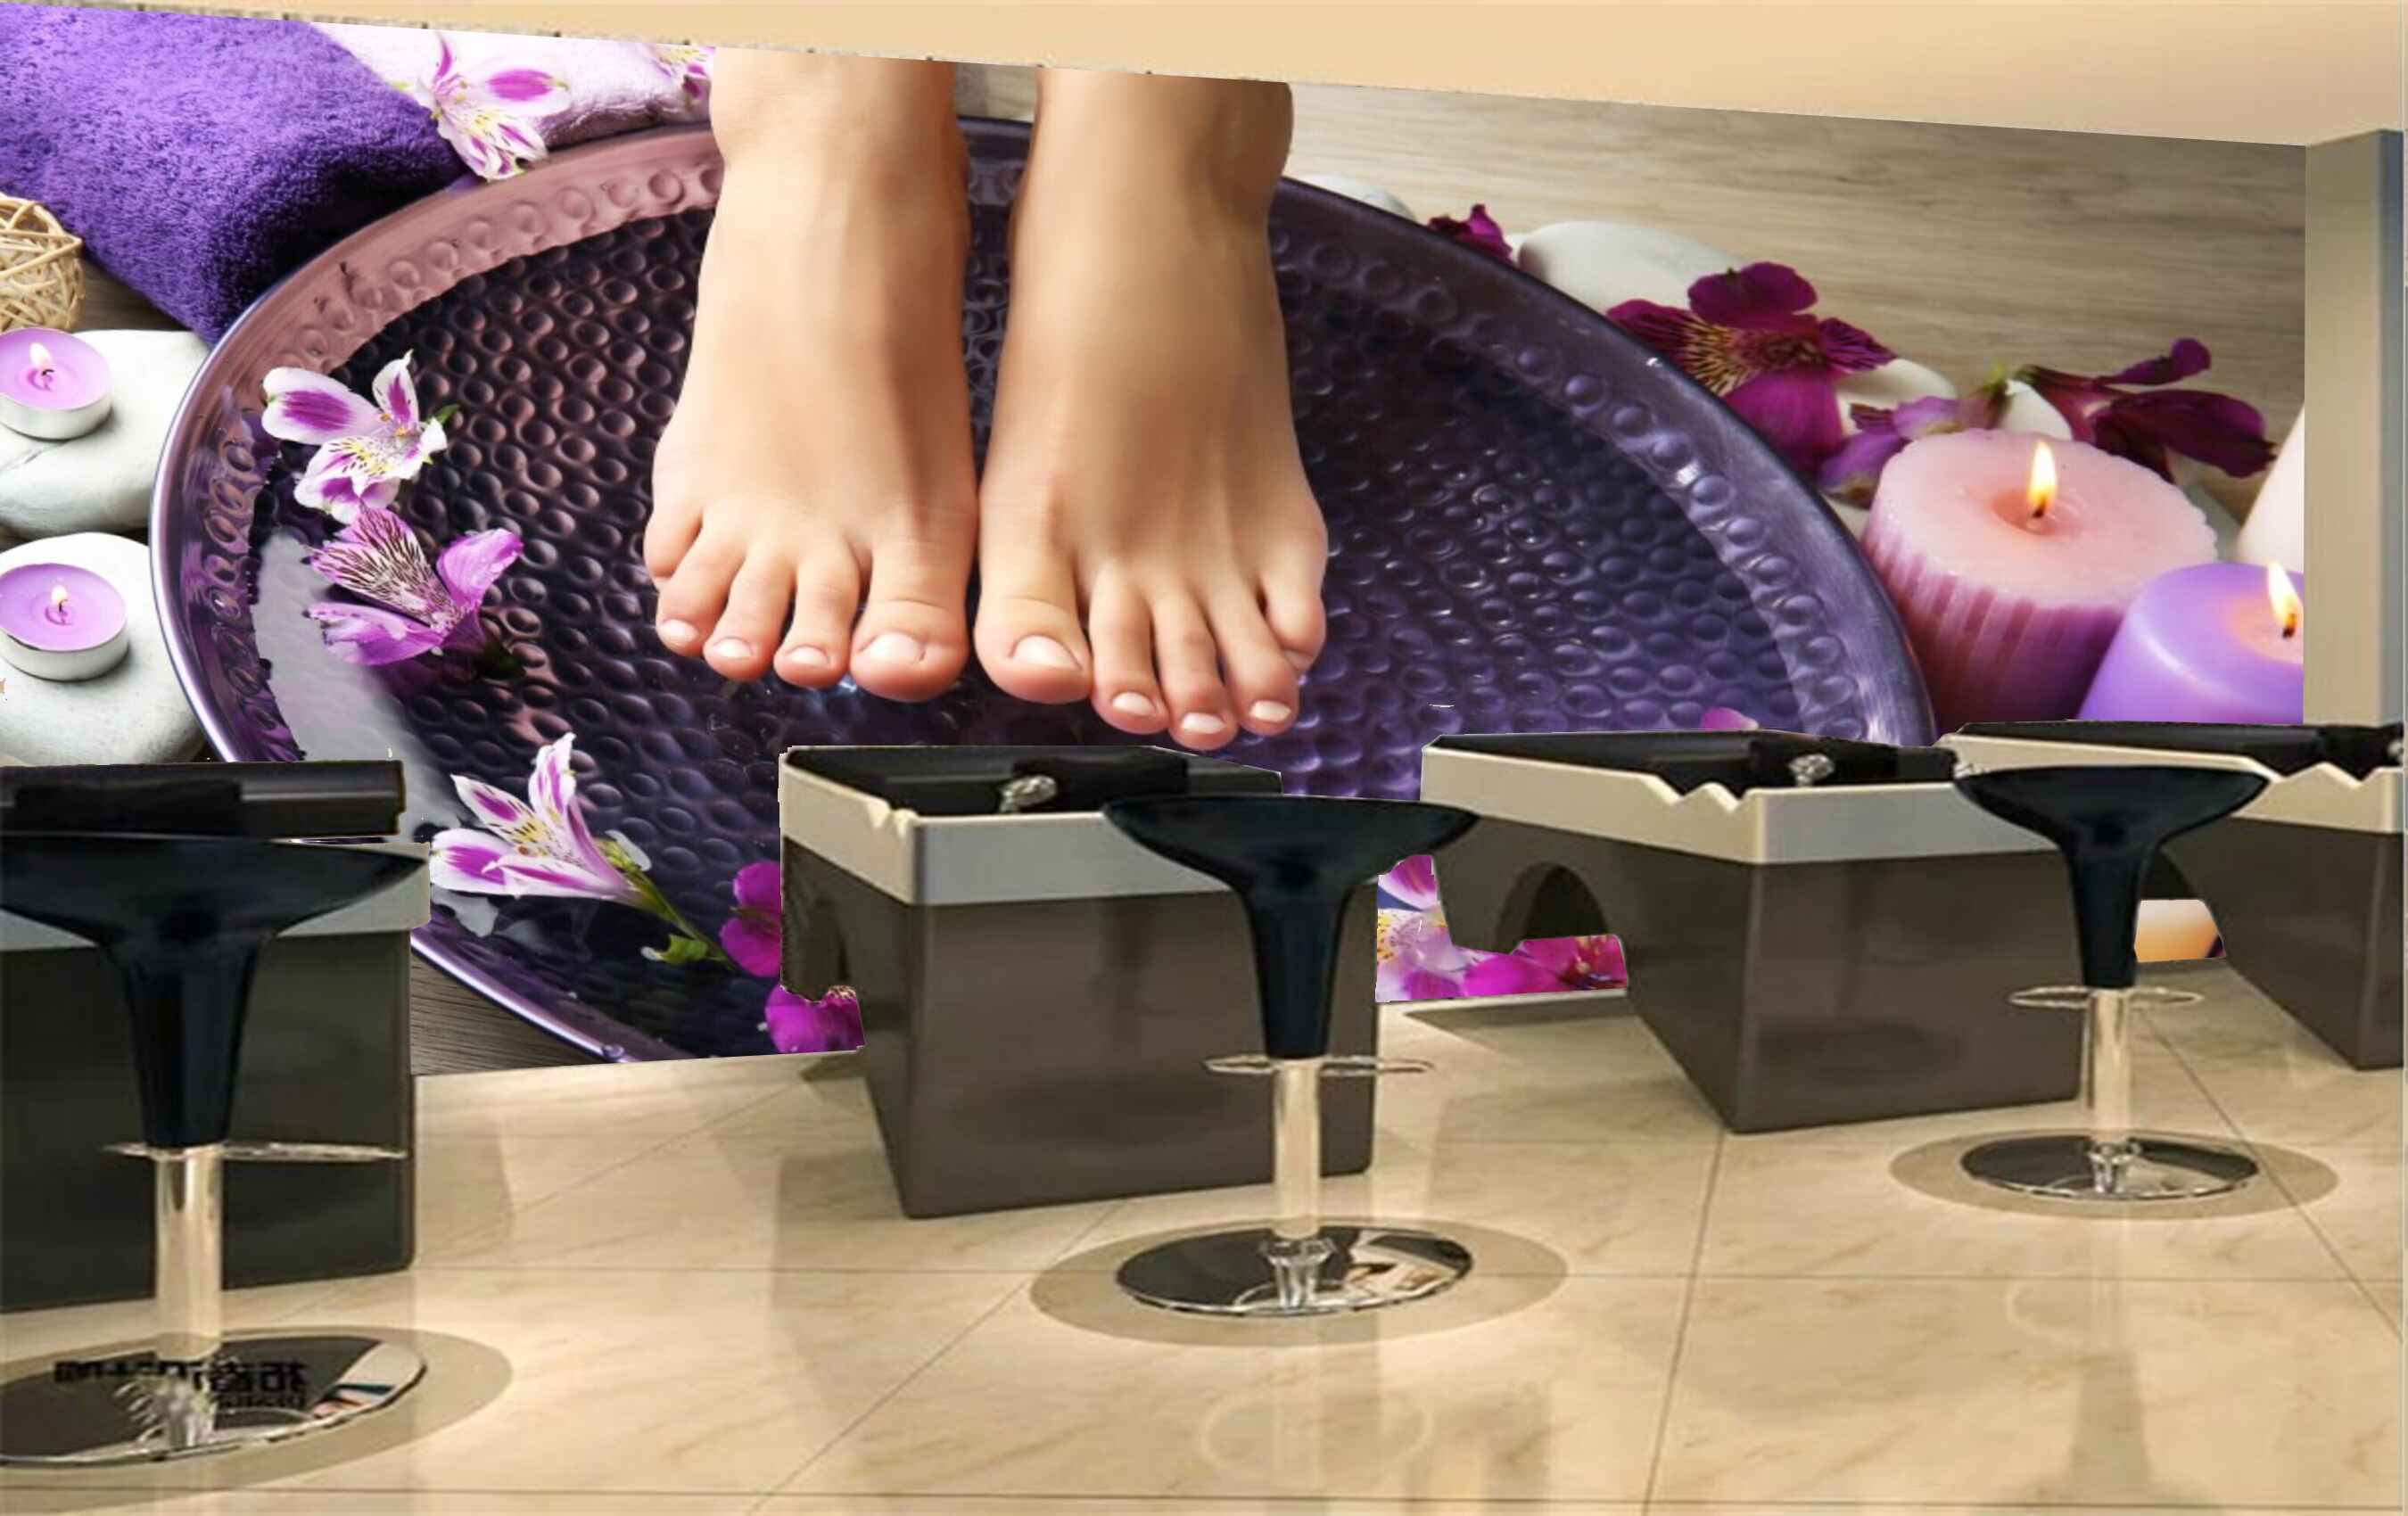 Avikalp MWZ3753 Feet Cleaning Bowl Flowers Candles Stones HD Wallpaper for Spa